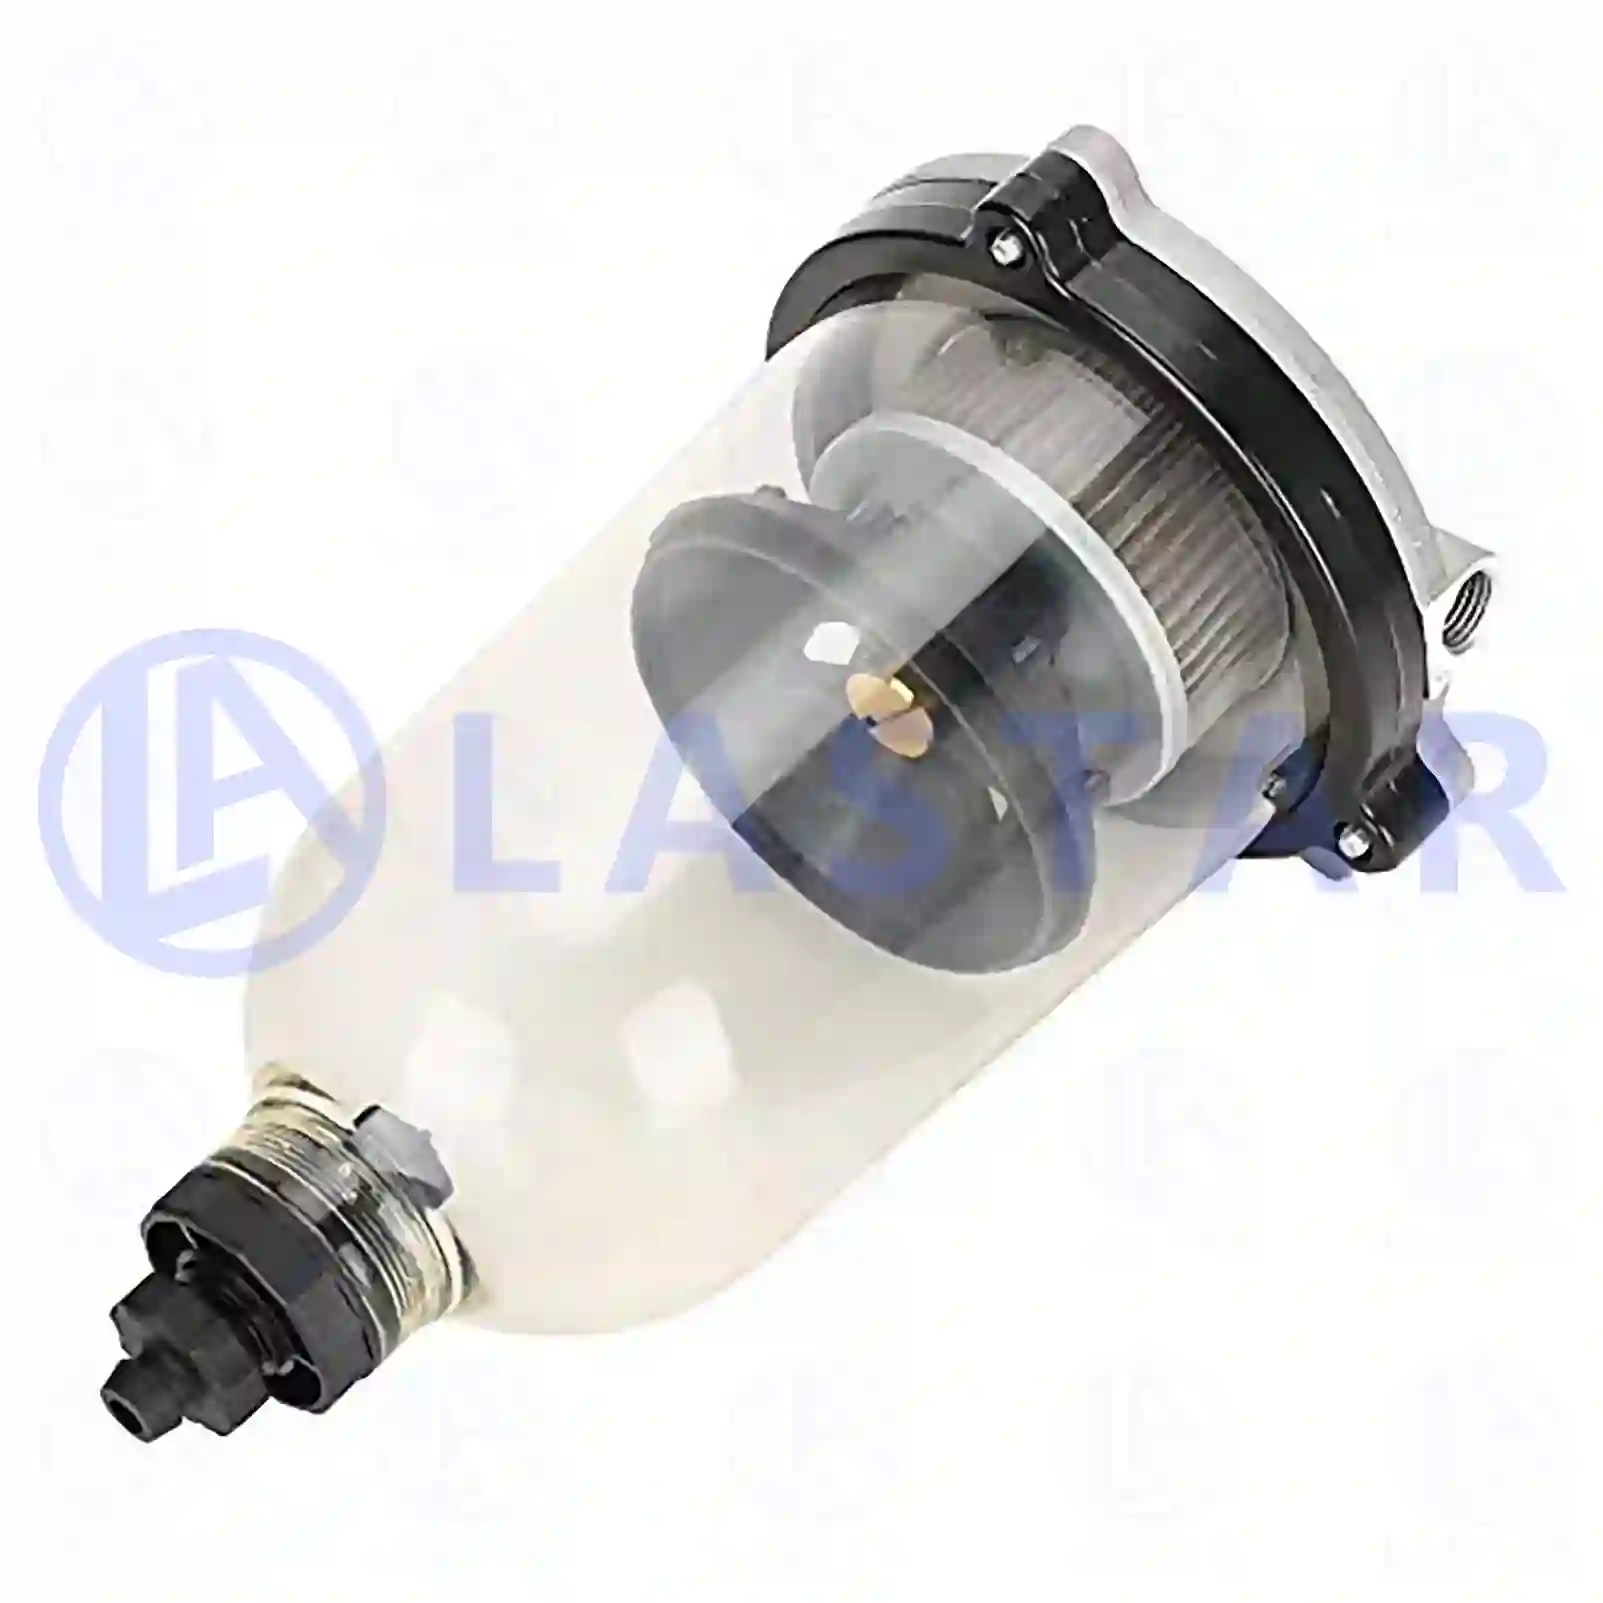 Fuel filter, water separator, 77724240, 5010140900, ZG10168-0008 ||  77724240 Lastar Spare Part | Truck Spare Parts, Auotomotive Spare Parts Fuel filter, water separator, 77724240, 5010140900, ZG10168-0008 ||  77724240 Lastar Spare Part | Truck Spare Parts, Auotomotive Spare Parts